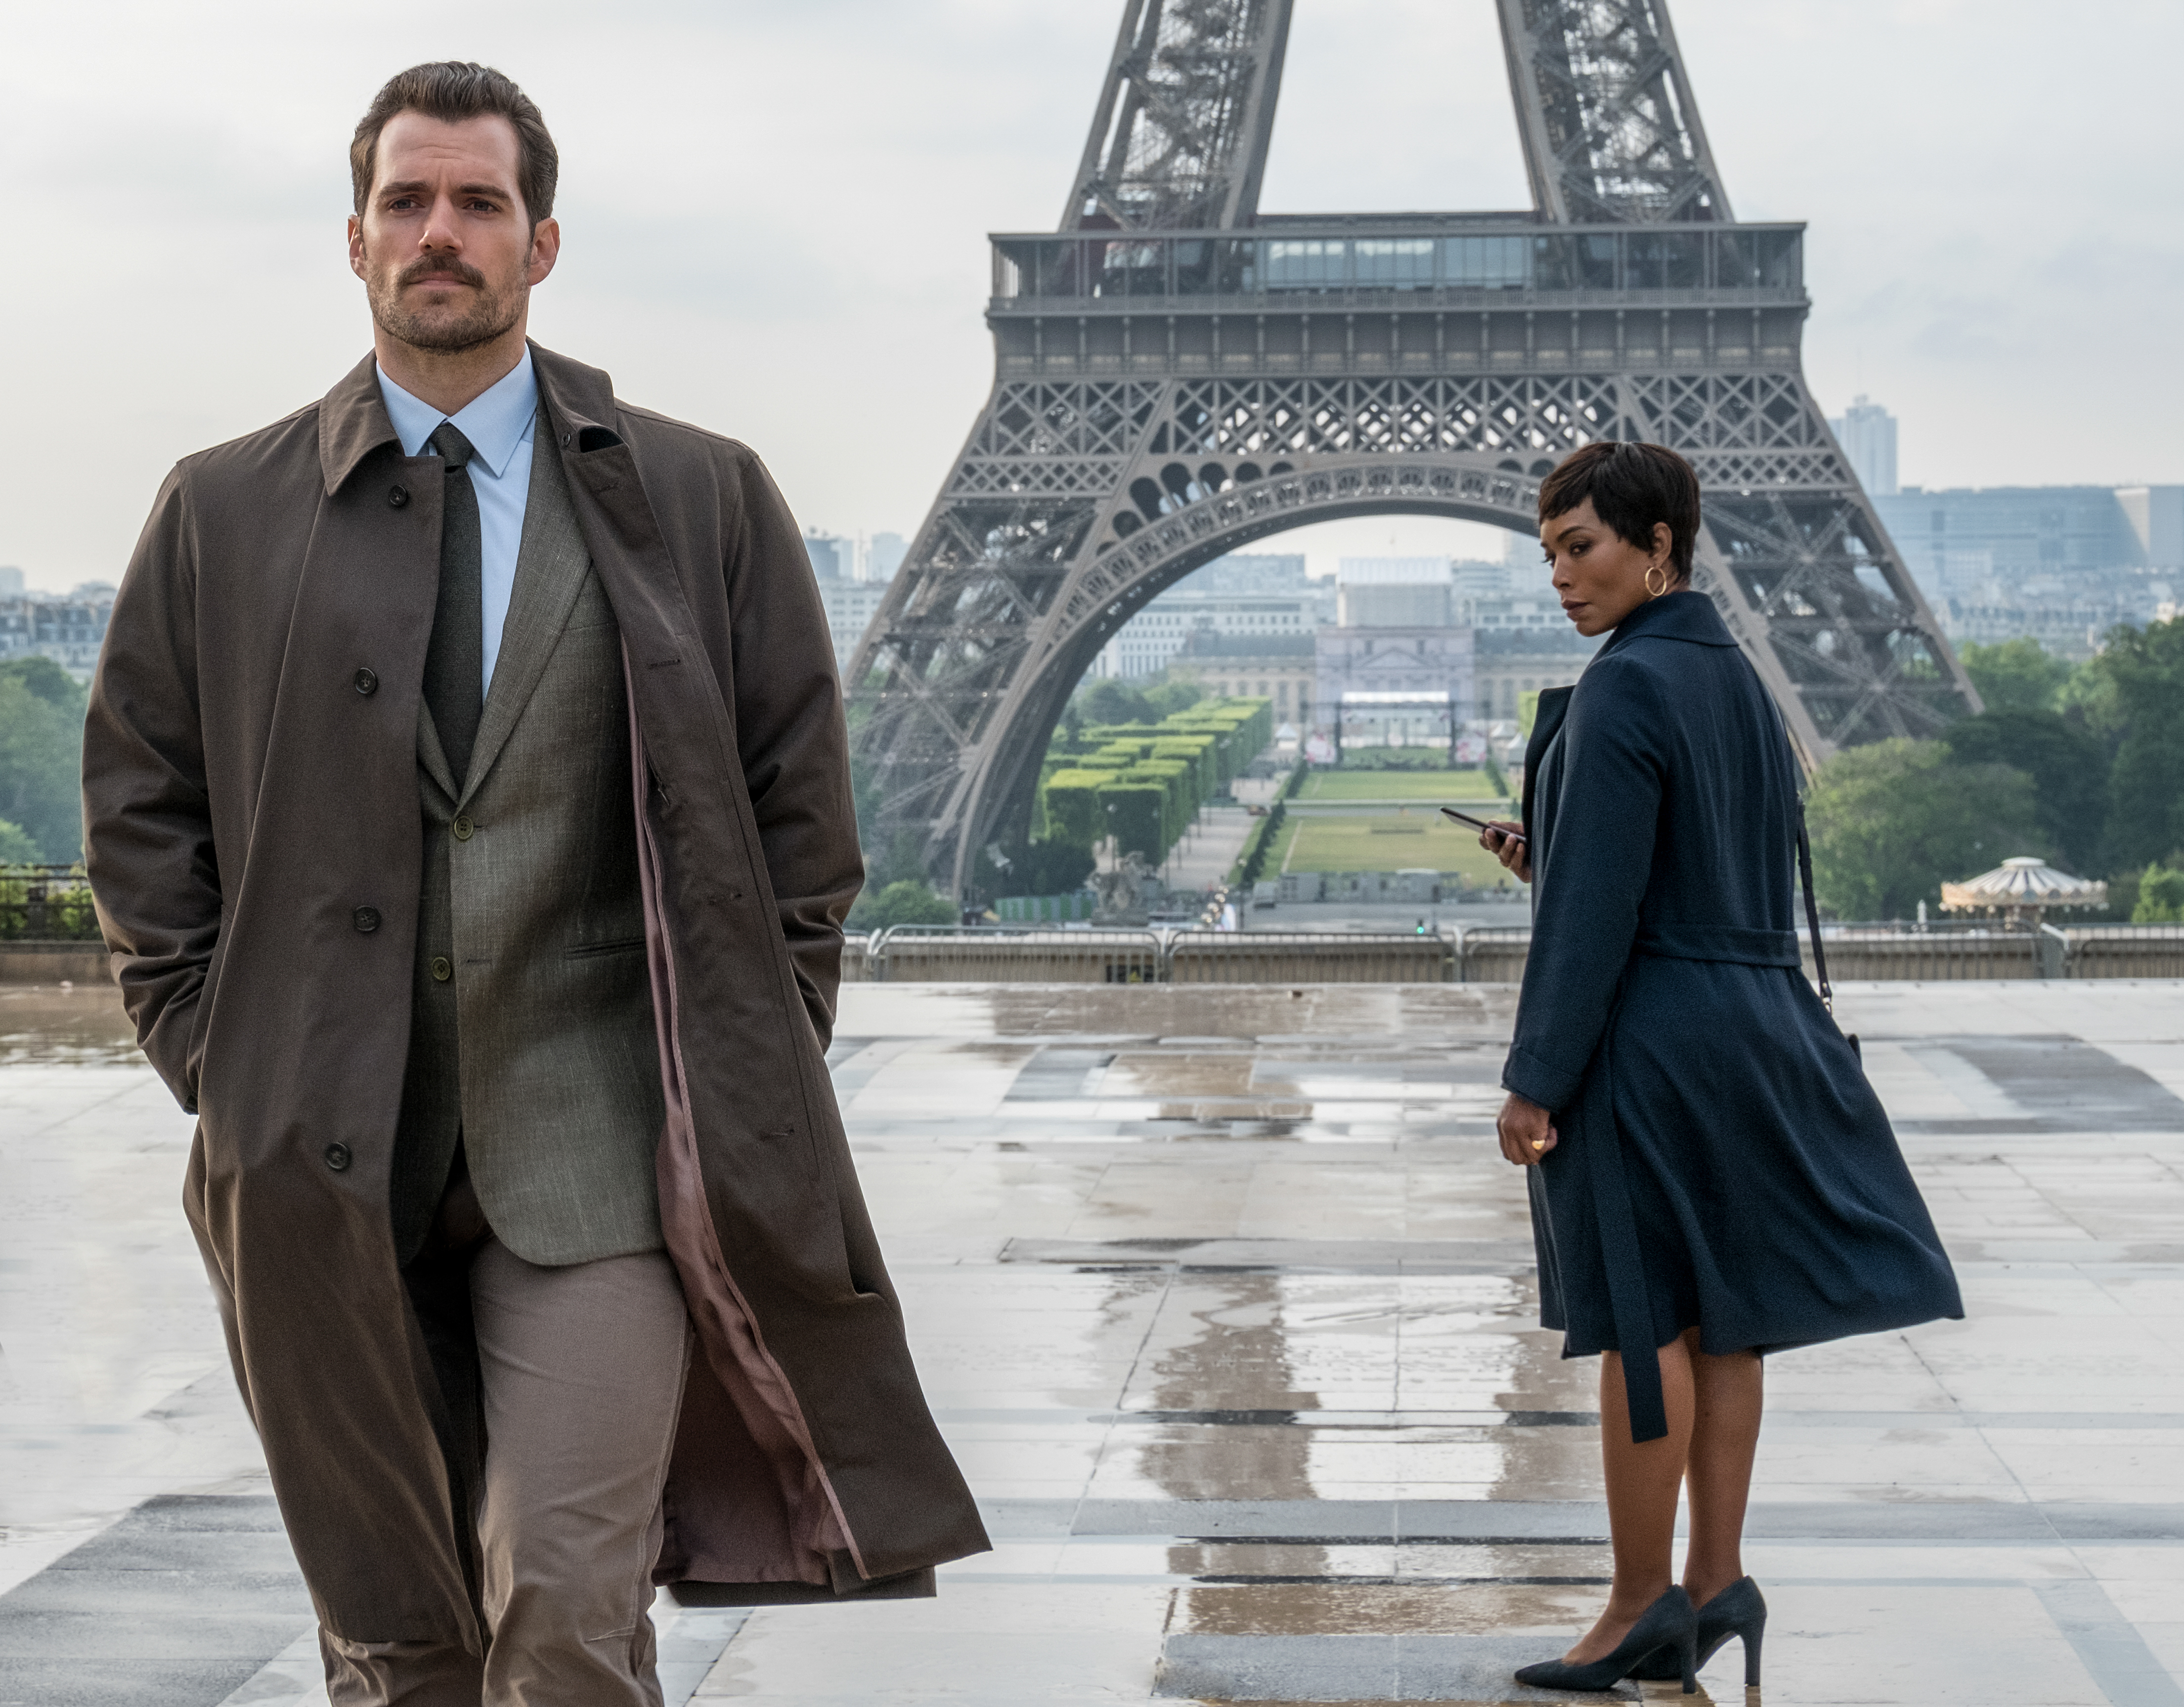 henry cavill, august walker, movie, mission: impossible fallout, angela bassett, mission: impossible